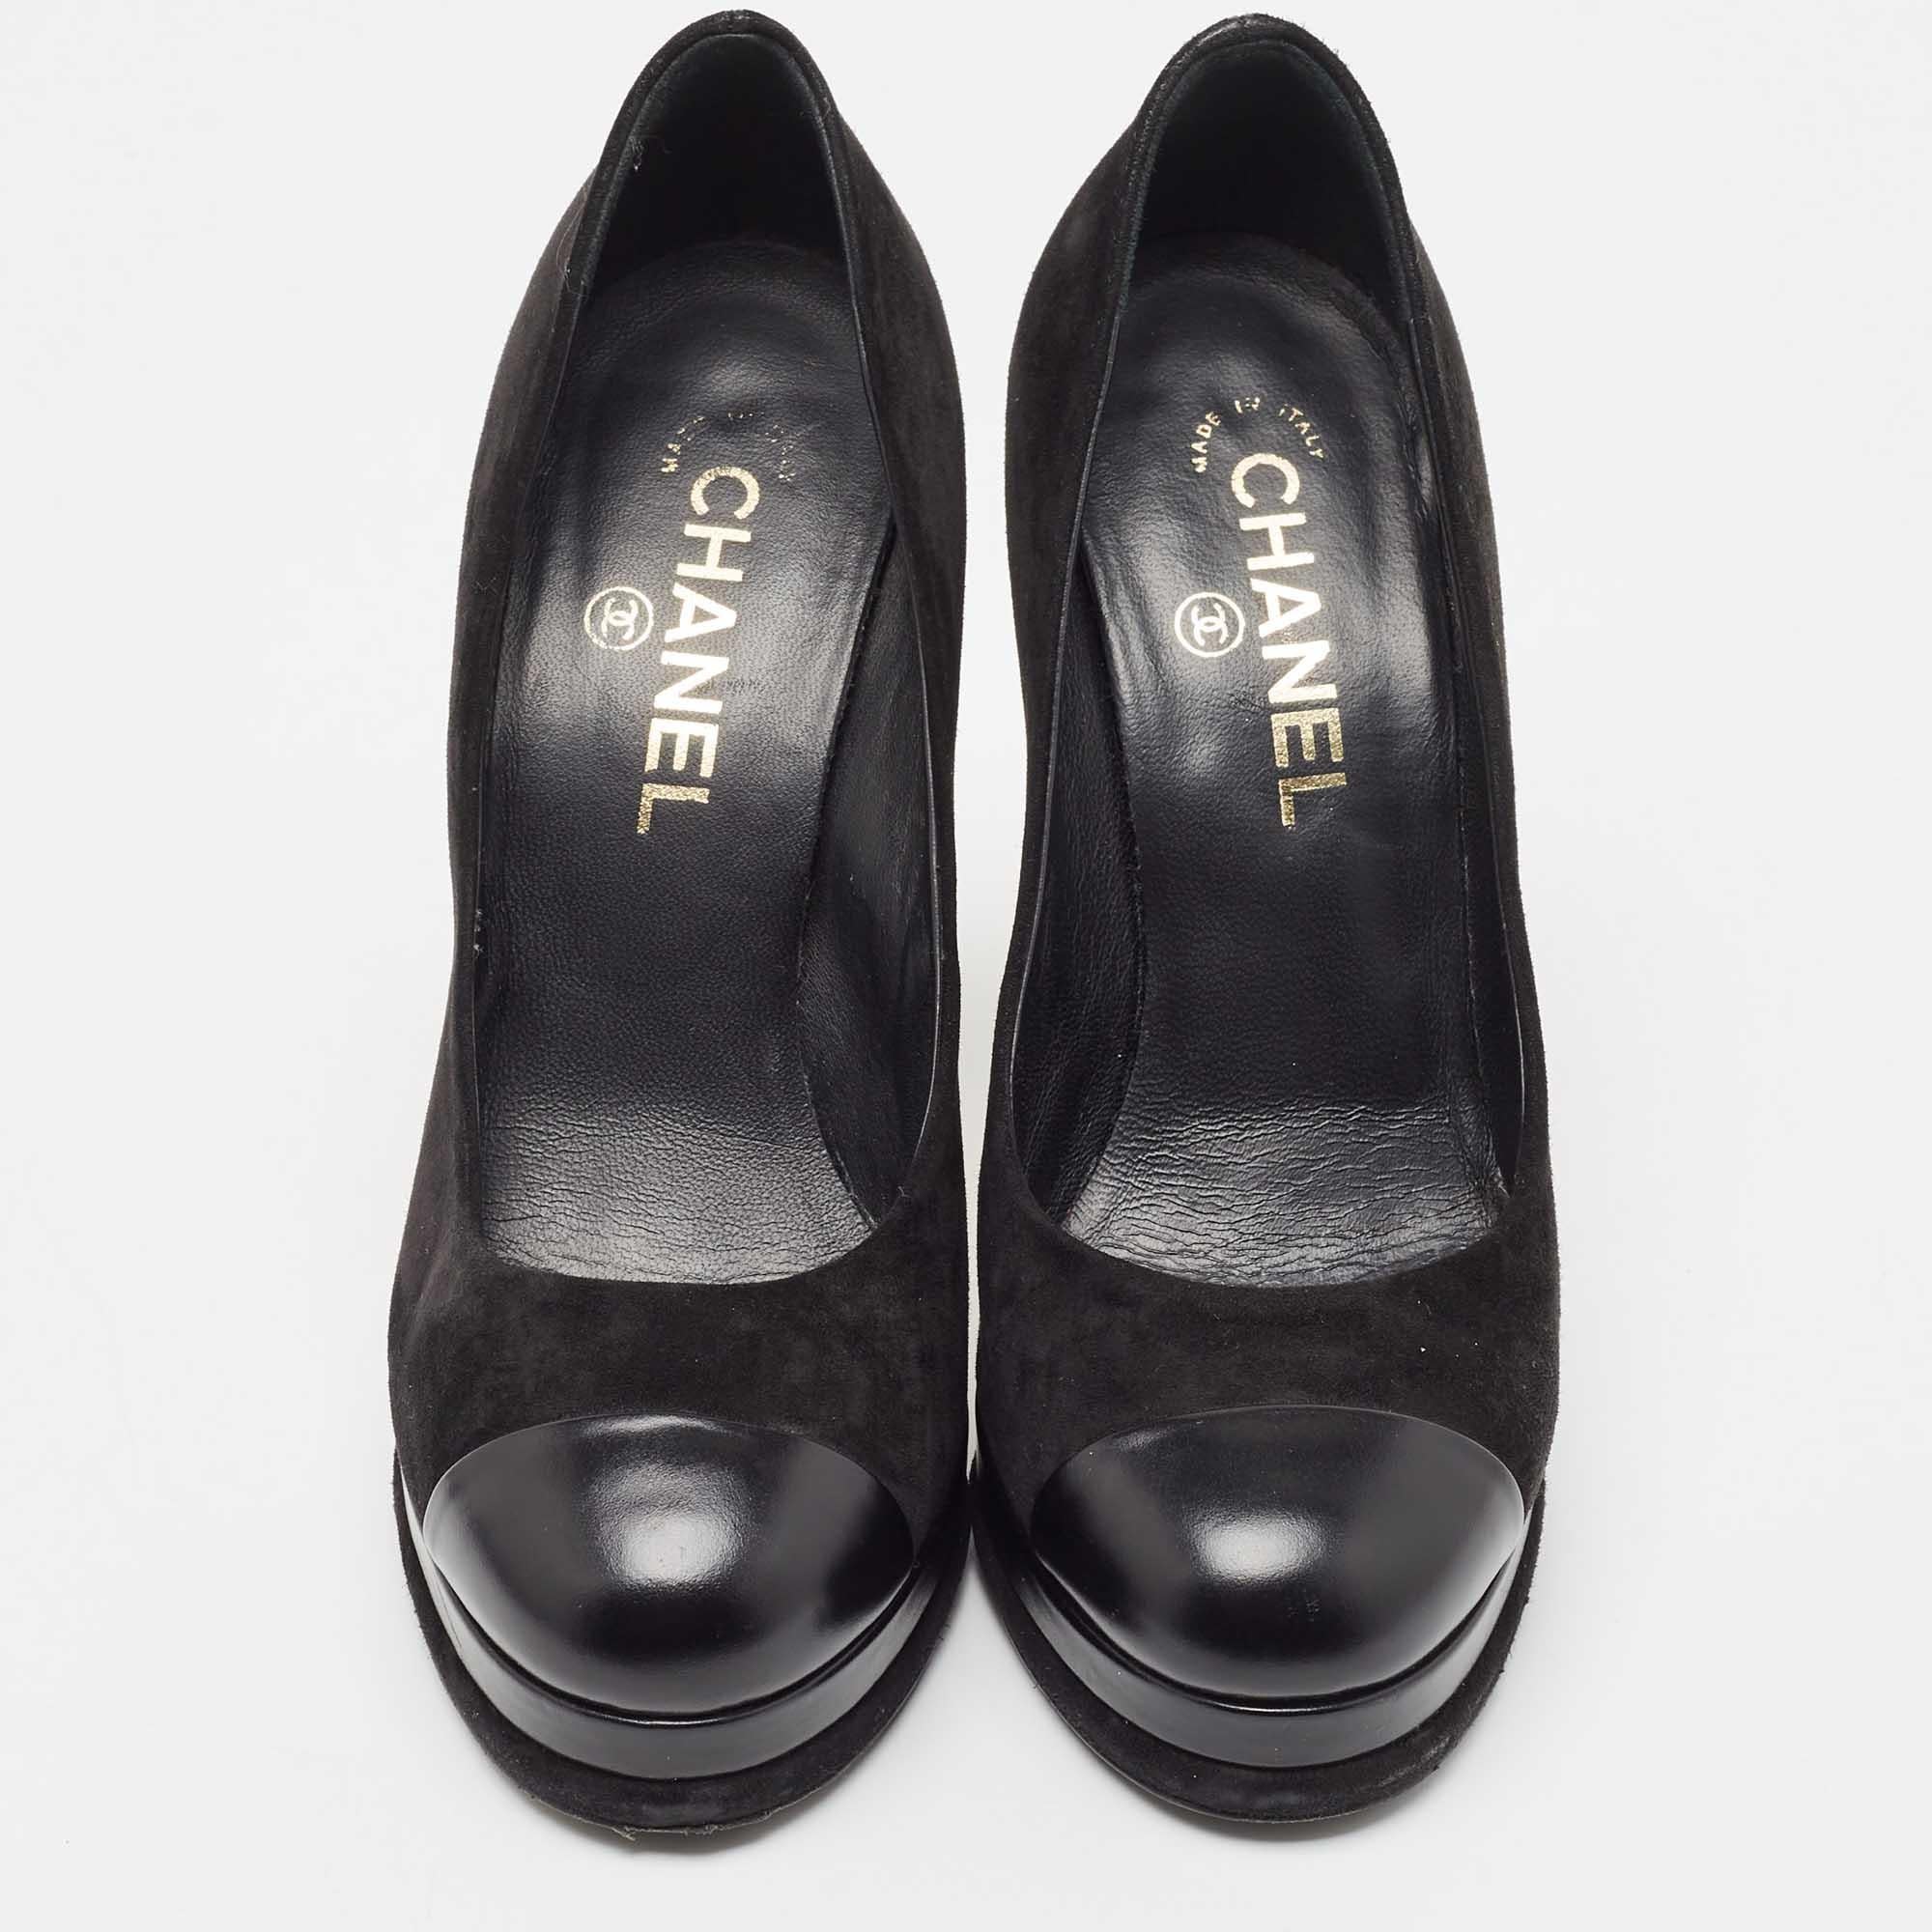 Exhibit an elegant style with this pair of pumps. These Chanel shoes for women are crafted from quality materials. They are set on durable soles and sleek heels.

Includes: Original Dustbag

